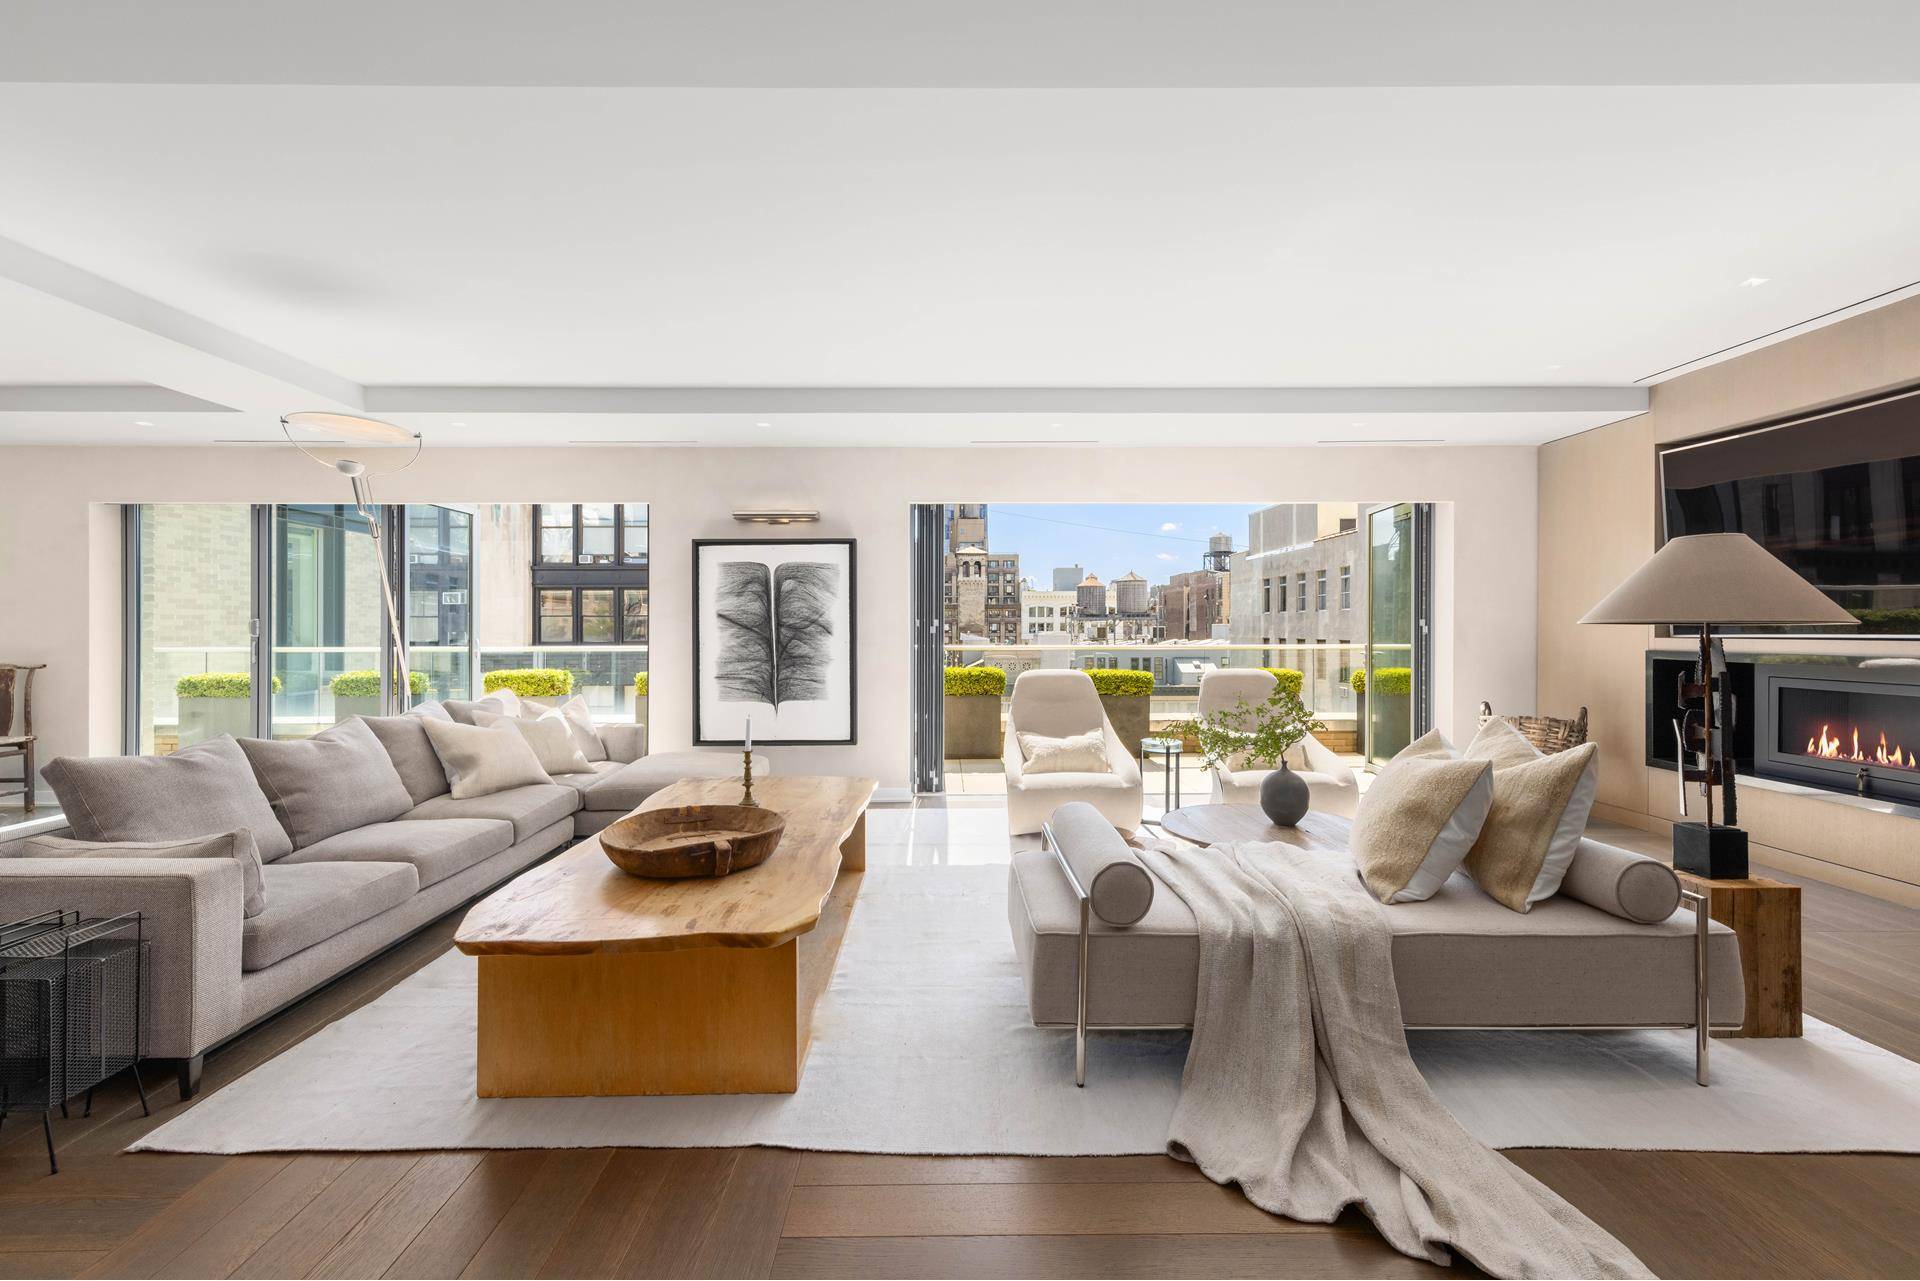 Allow us to introduce PH3 at 21 West 20th Street, a spectacular duplex penthouse with over 4, 200 interior square feet and 1, 750 square feet of private outdoor space.